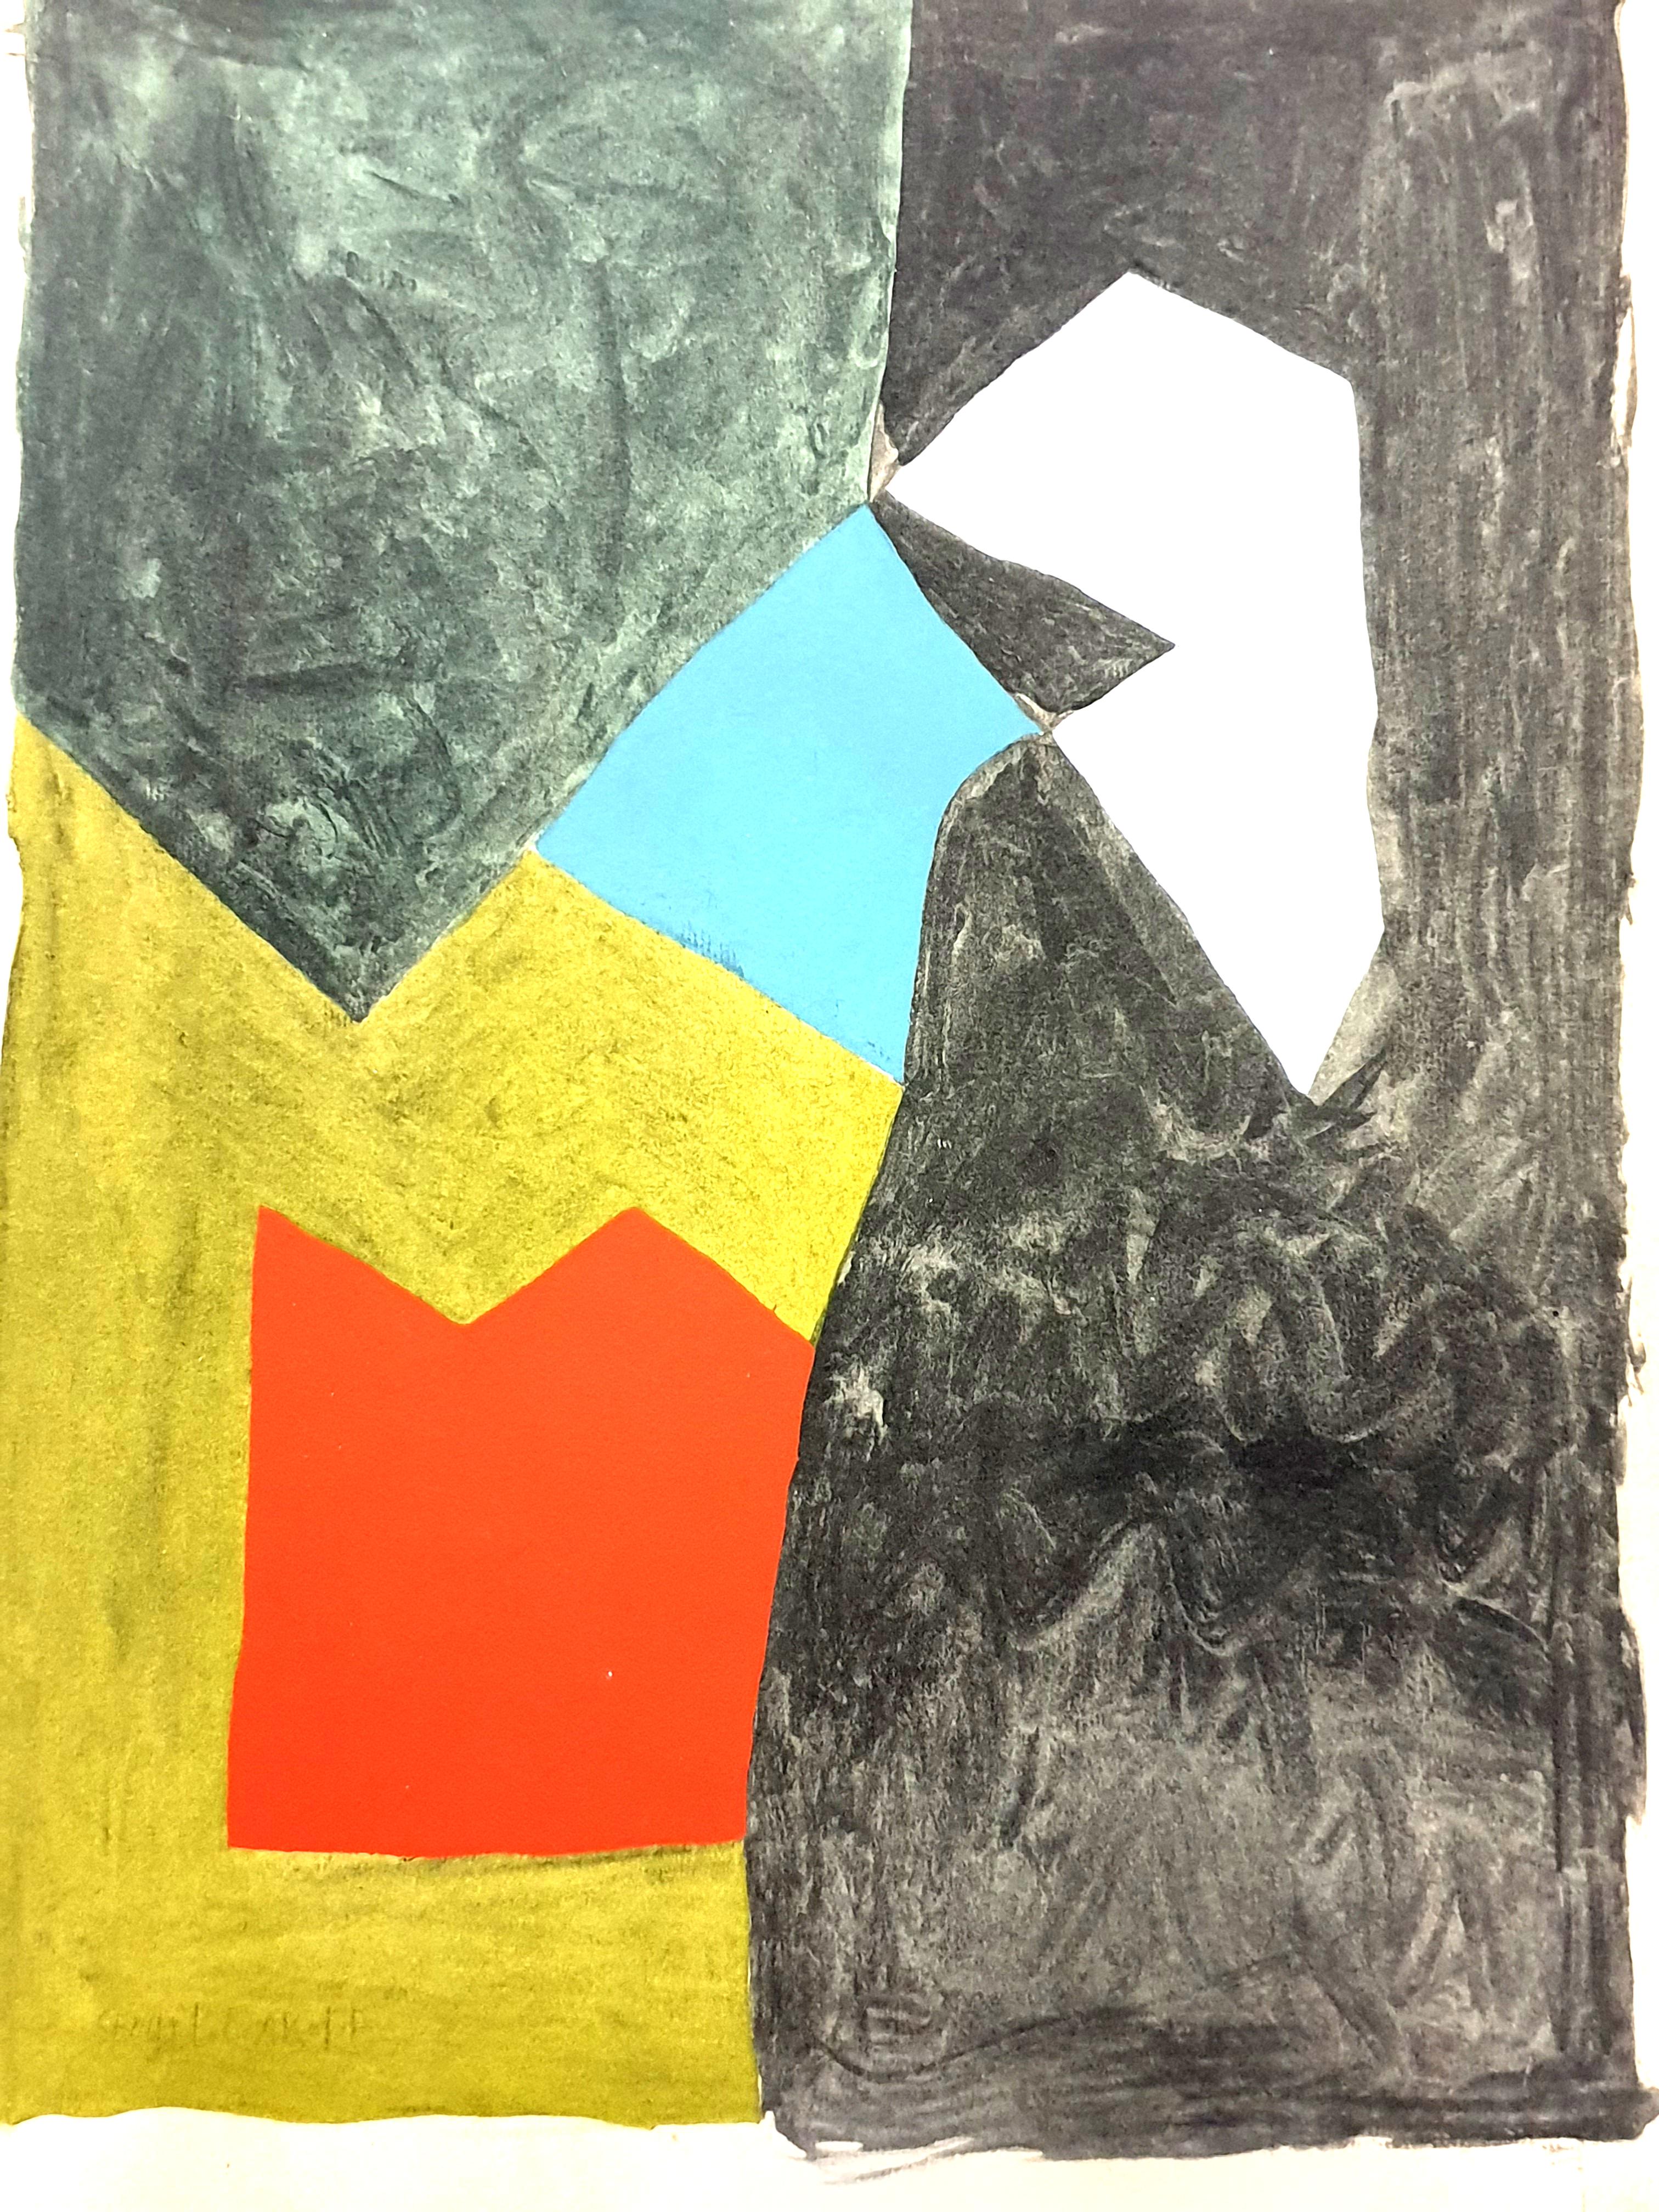 Serge Poliakoff (after) - Composition - Pochoir
Published in the deluxe art review, XXe Siecle
1956
Dimensions: 32 x 24 cm 
Publisher: G. di San Lazzaro.
Unsigned and unumbered as issued